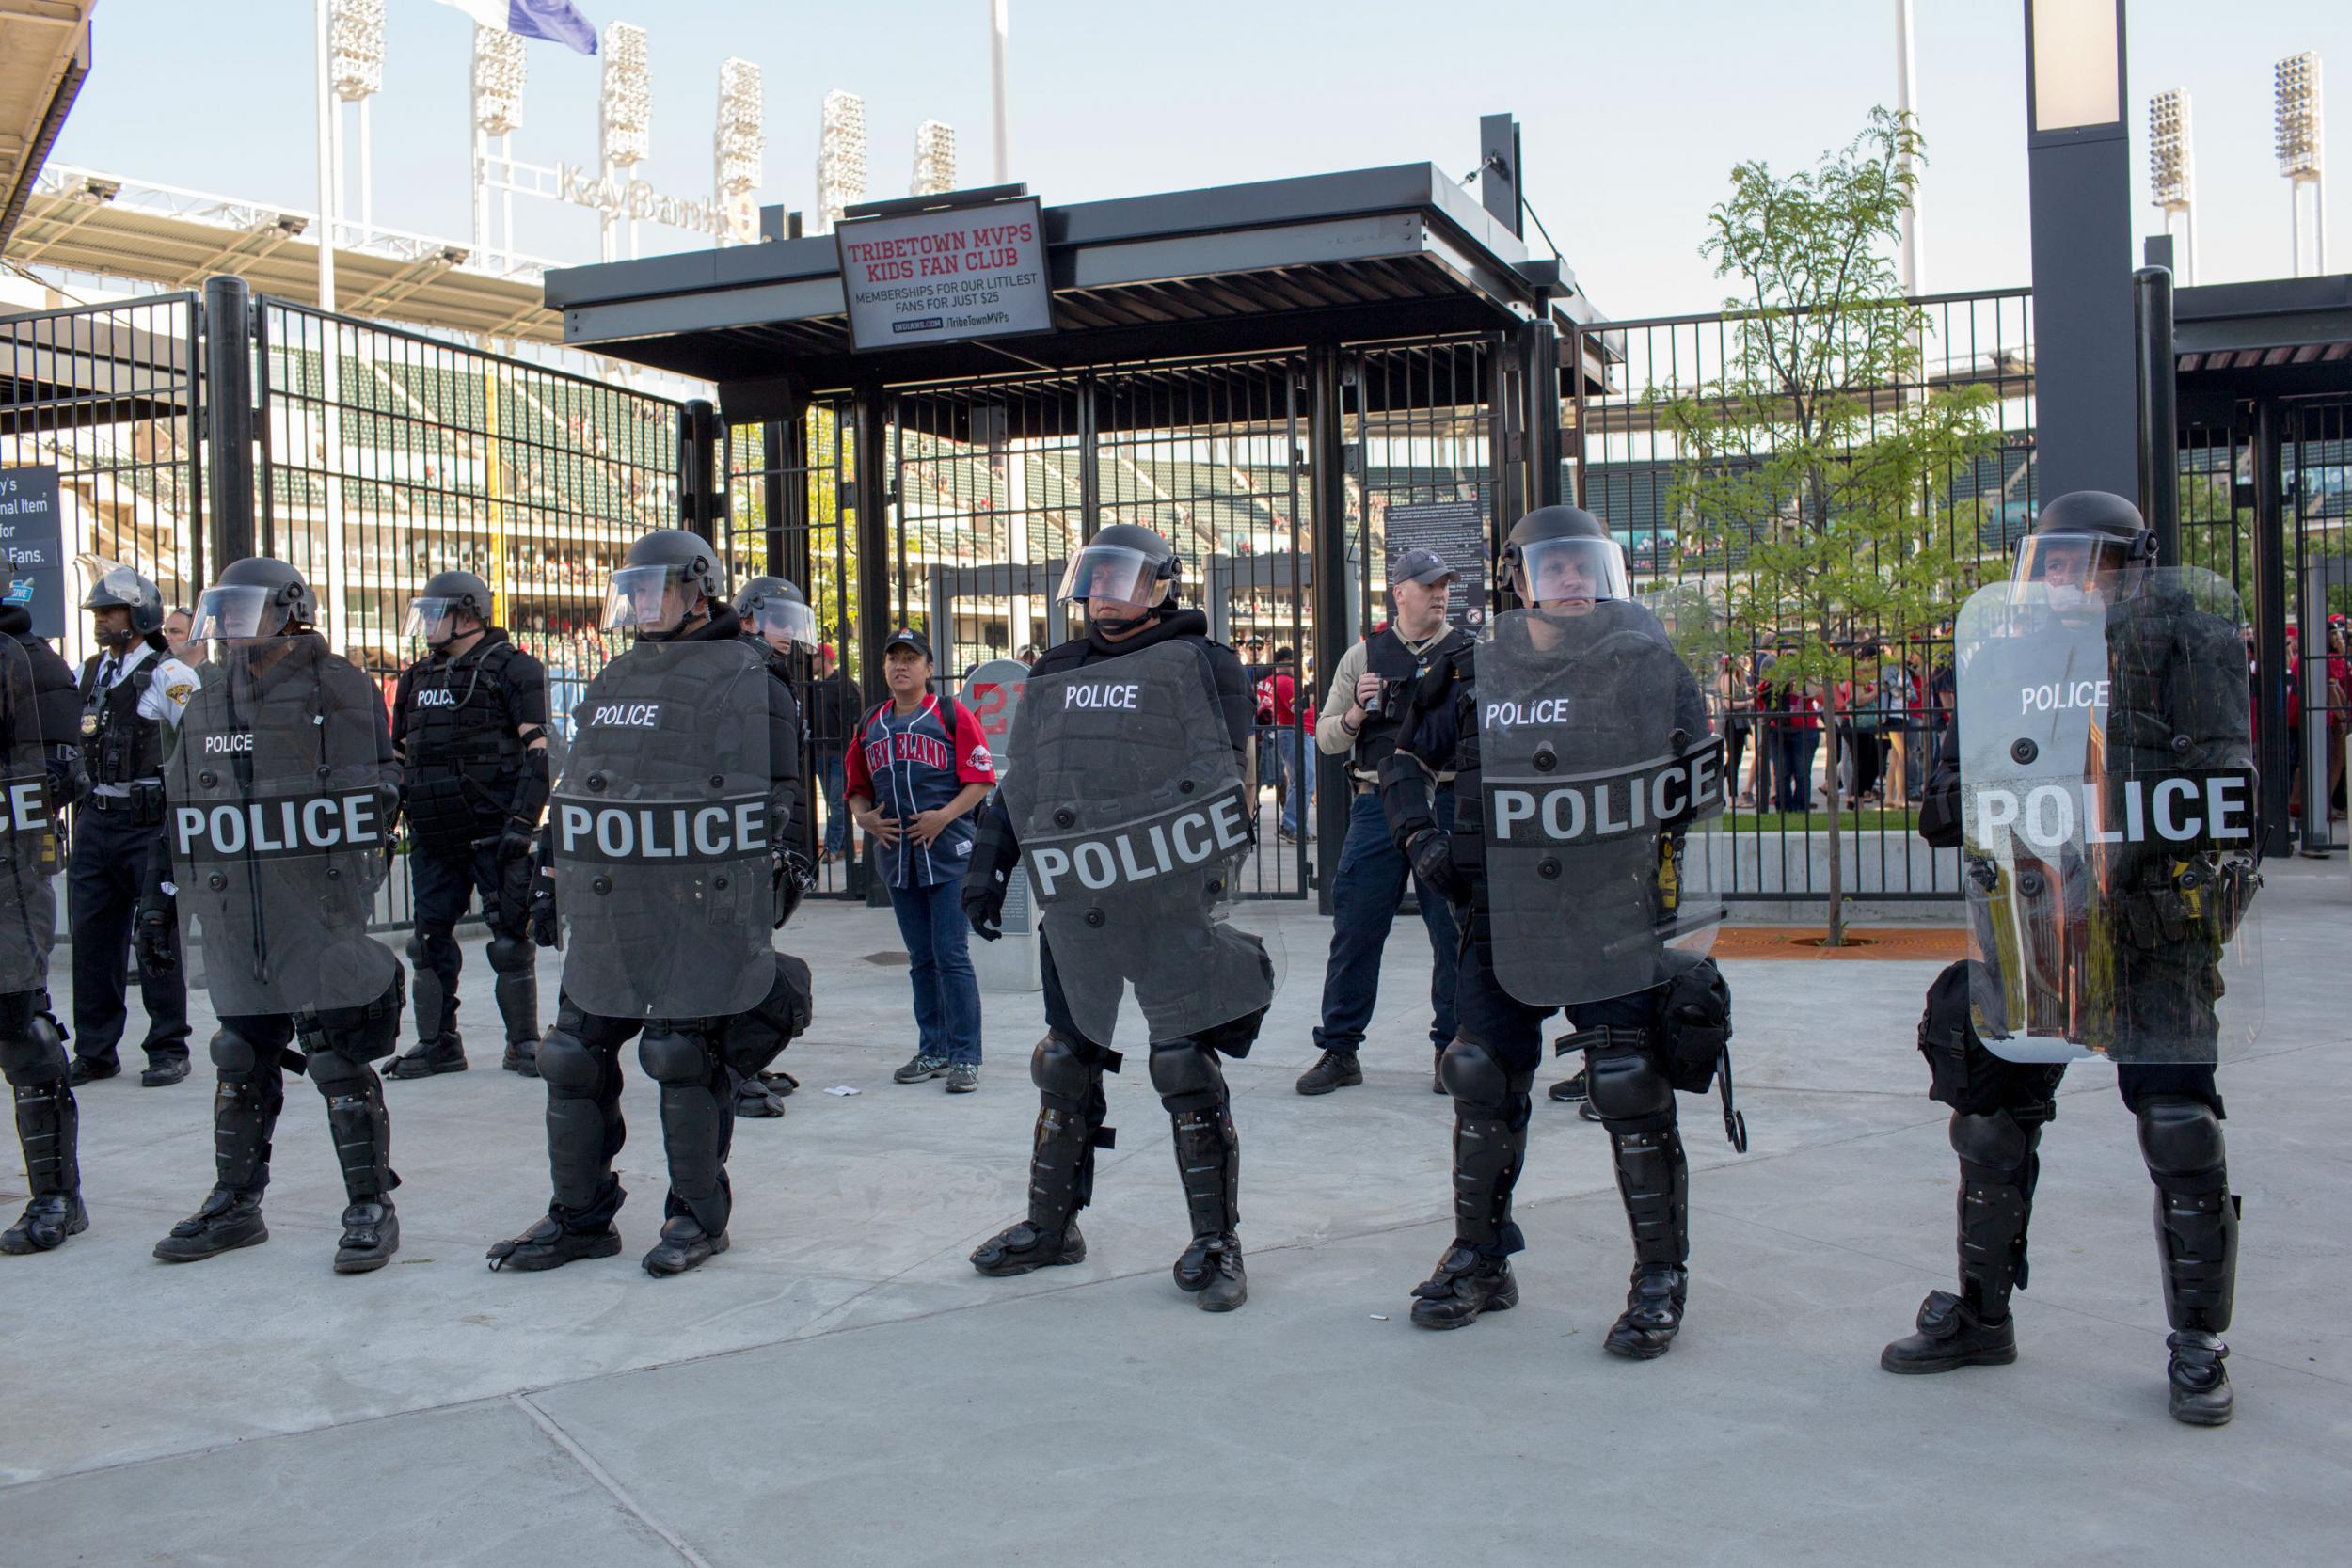 Police stood against protestors last year when Michael Brelo was acquitted